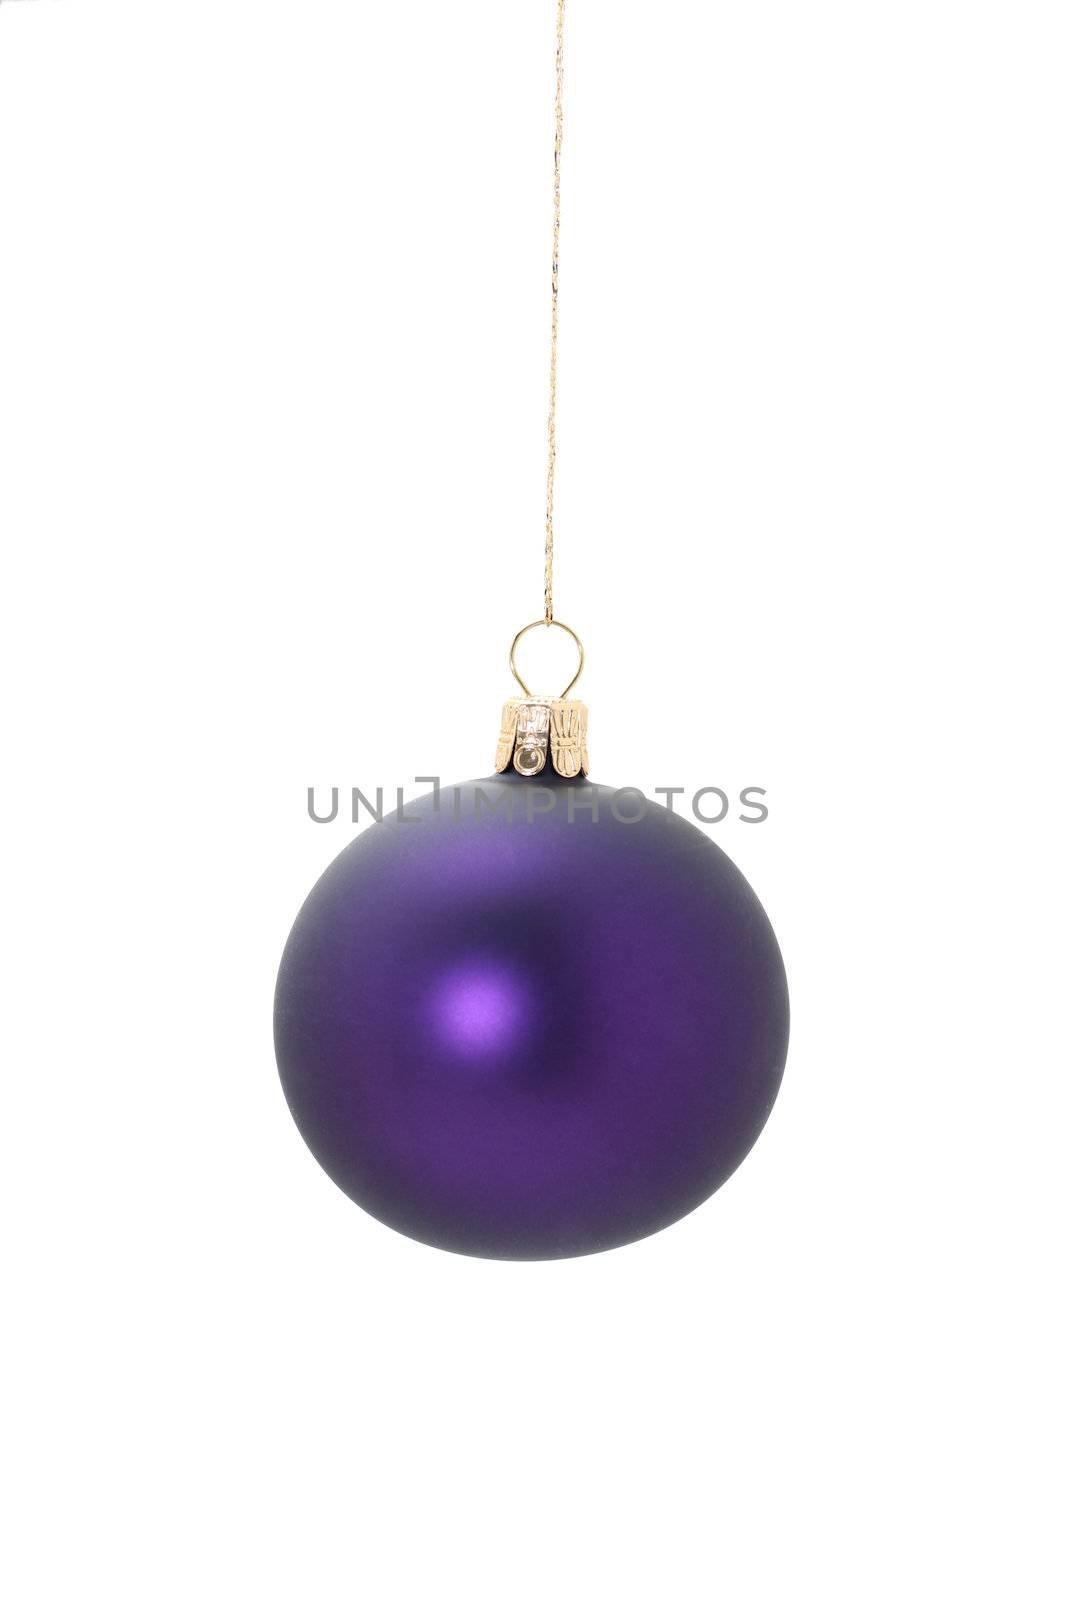 A violet christmas ball hanging from golden thread, shot in studio isolated on white. Perfect for your holiday designs or ads